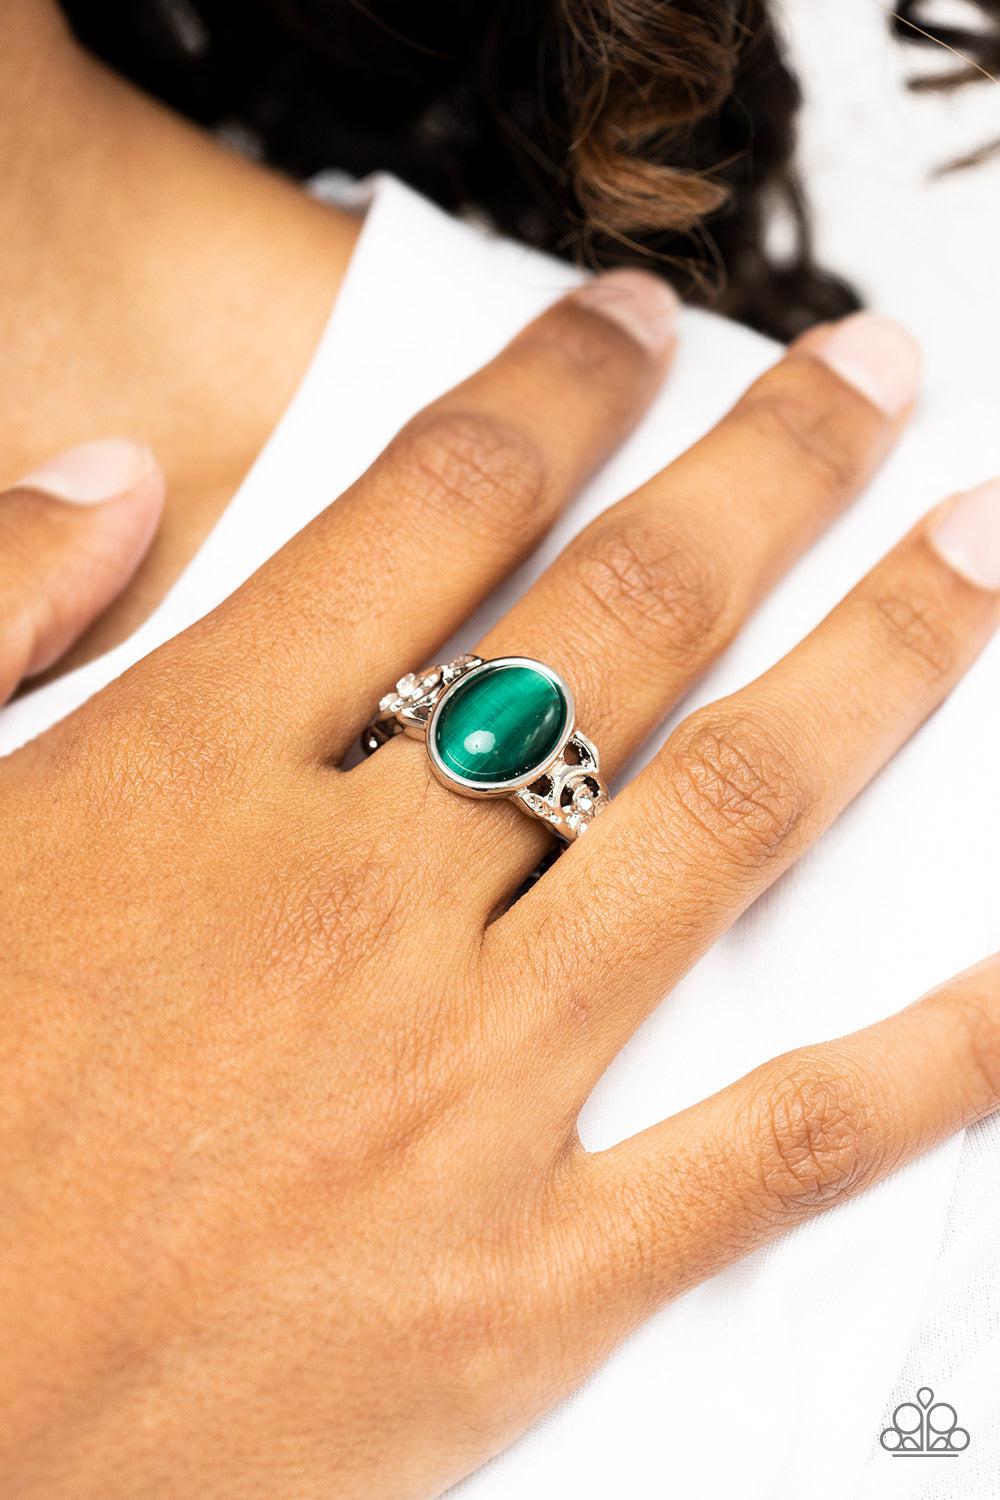 Crystals and Cats Eye Green Stone Ring - Paparazzi Accessories- lightbox - CarasShop.com - $5 Jewelry by Cara Jewels